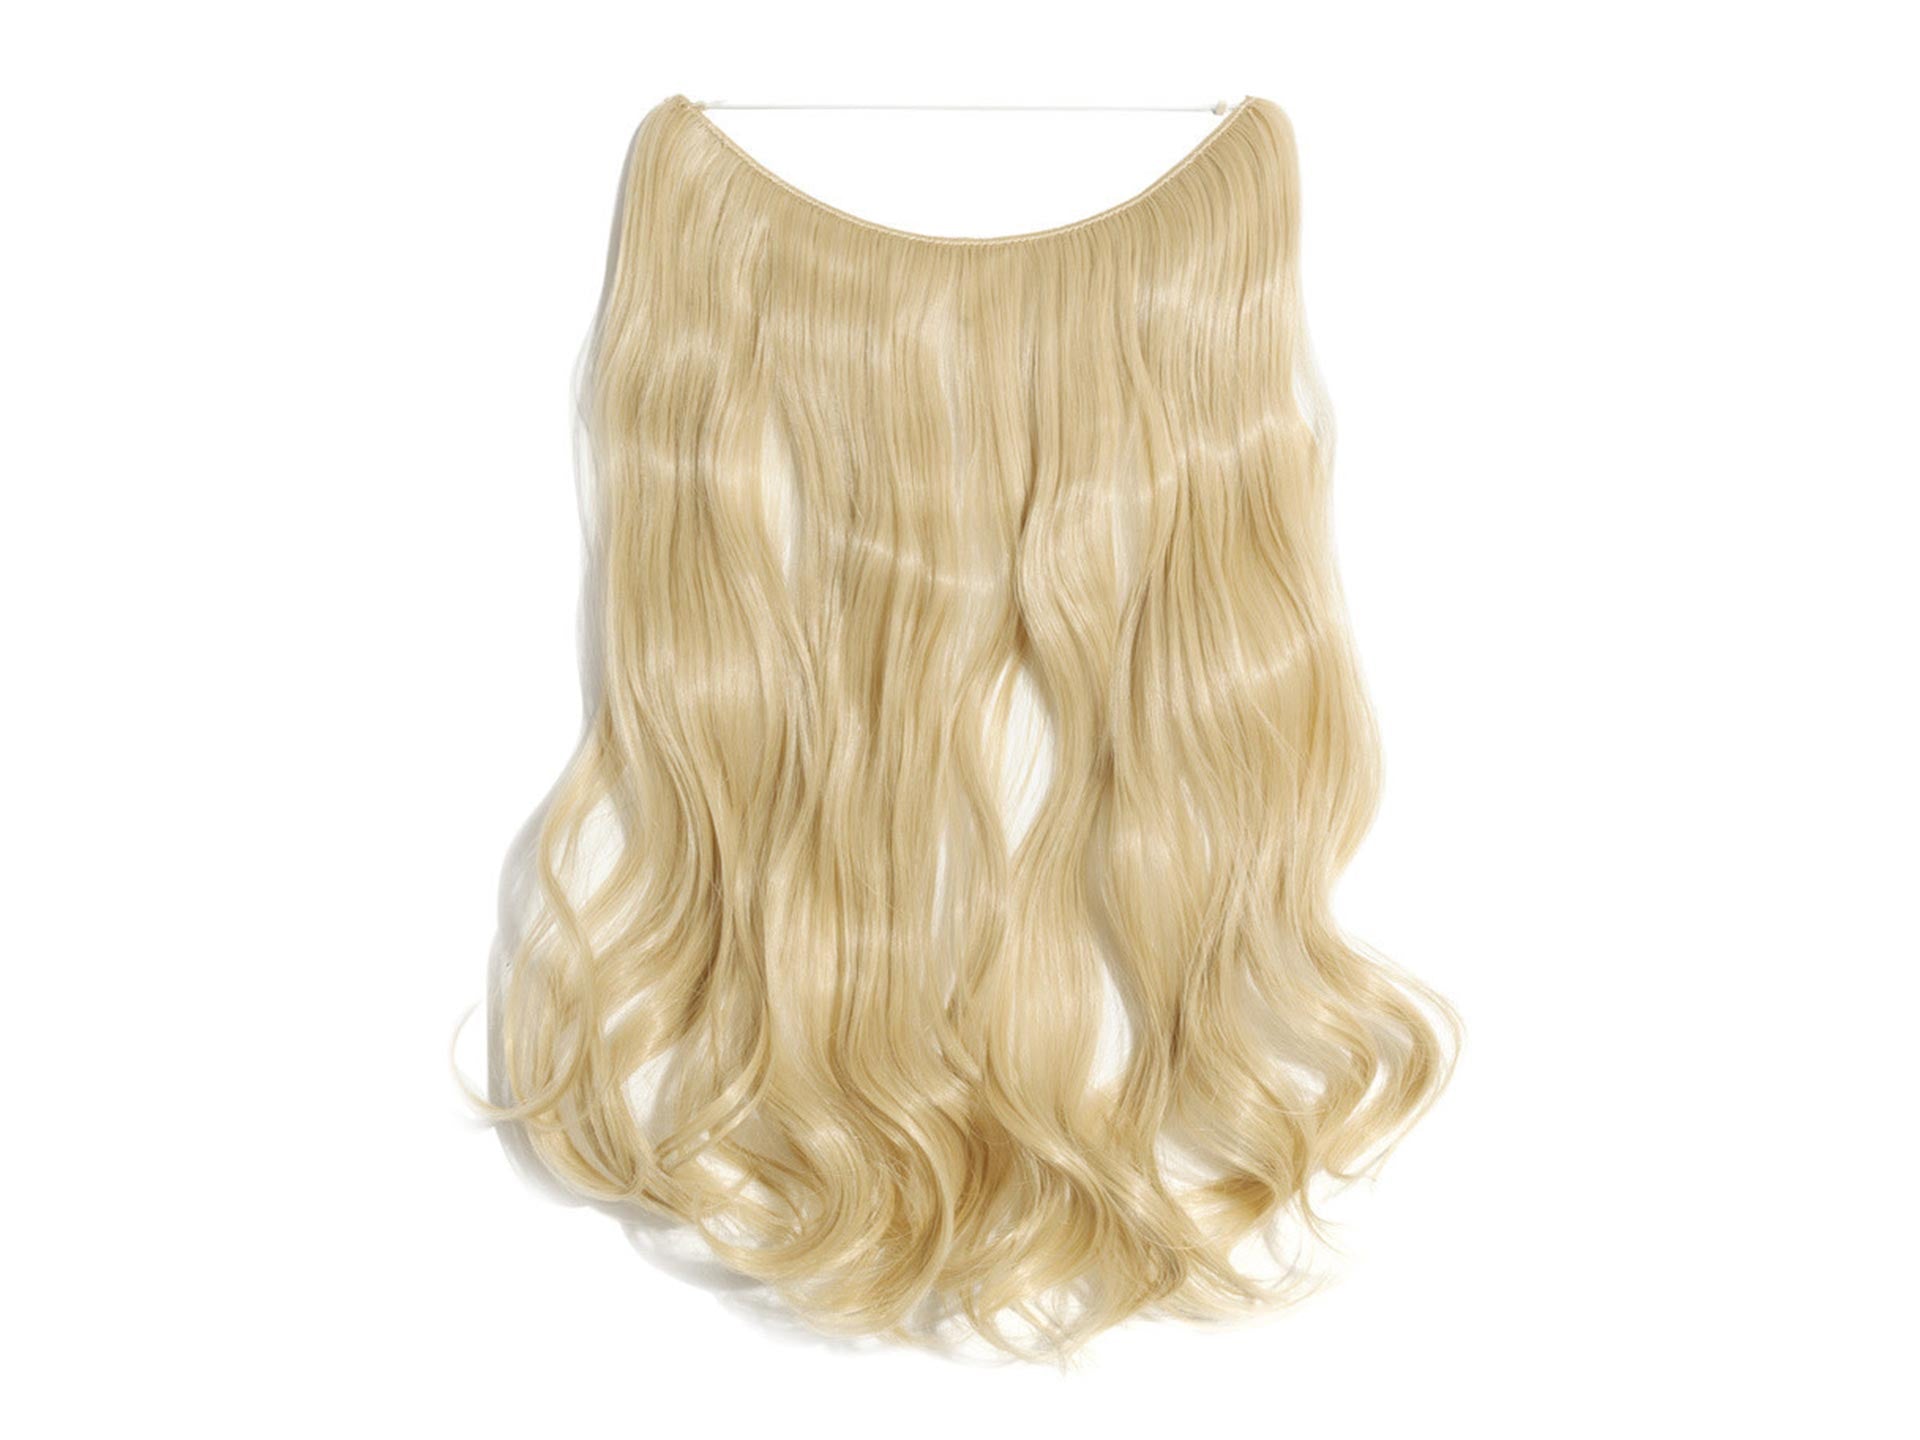 3. Grey Blonde Hair Piece - Halo Hair Extensions - wide 4